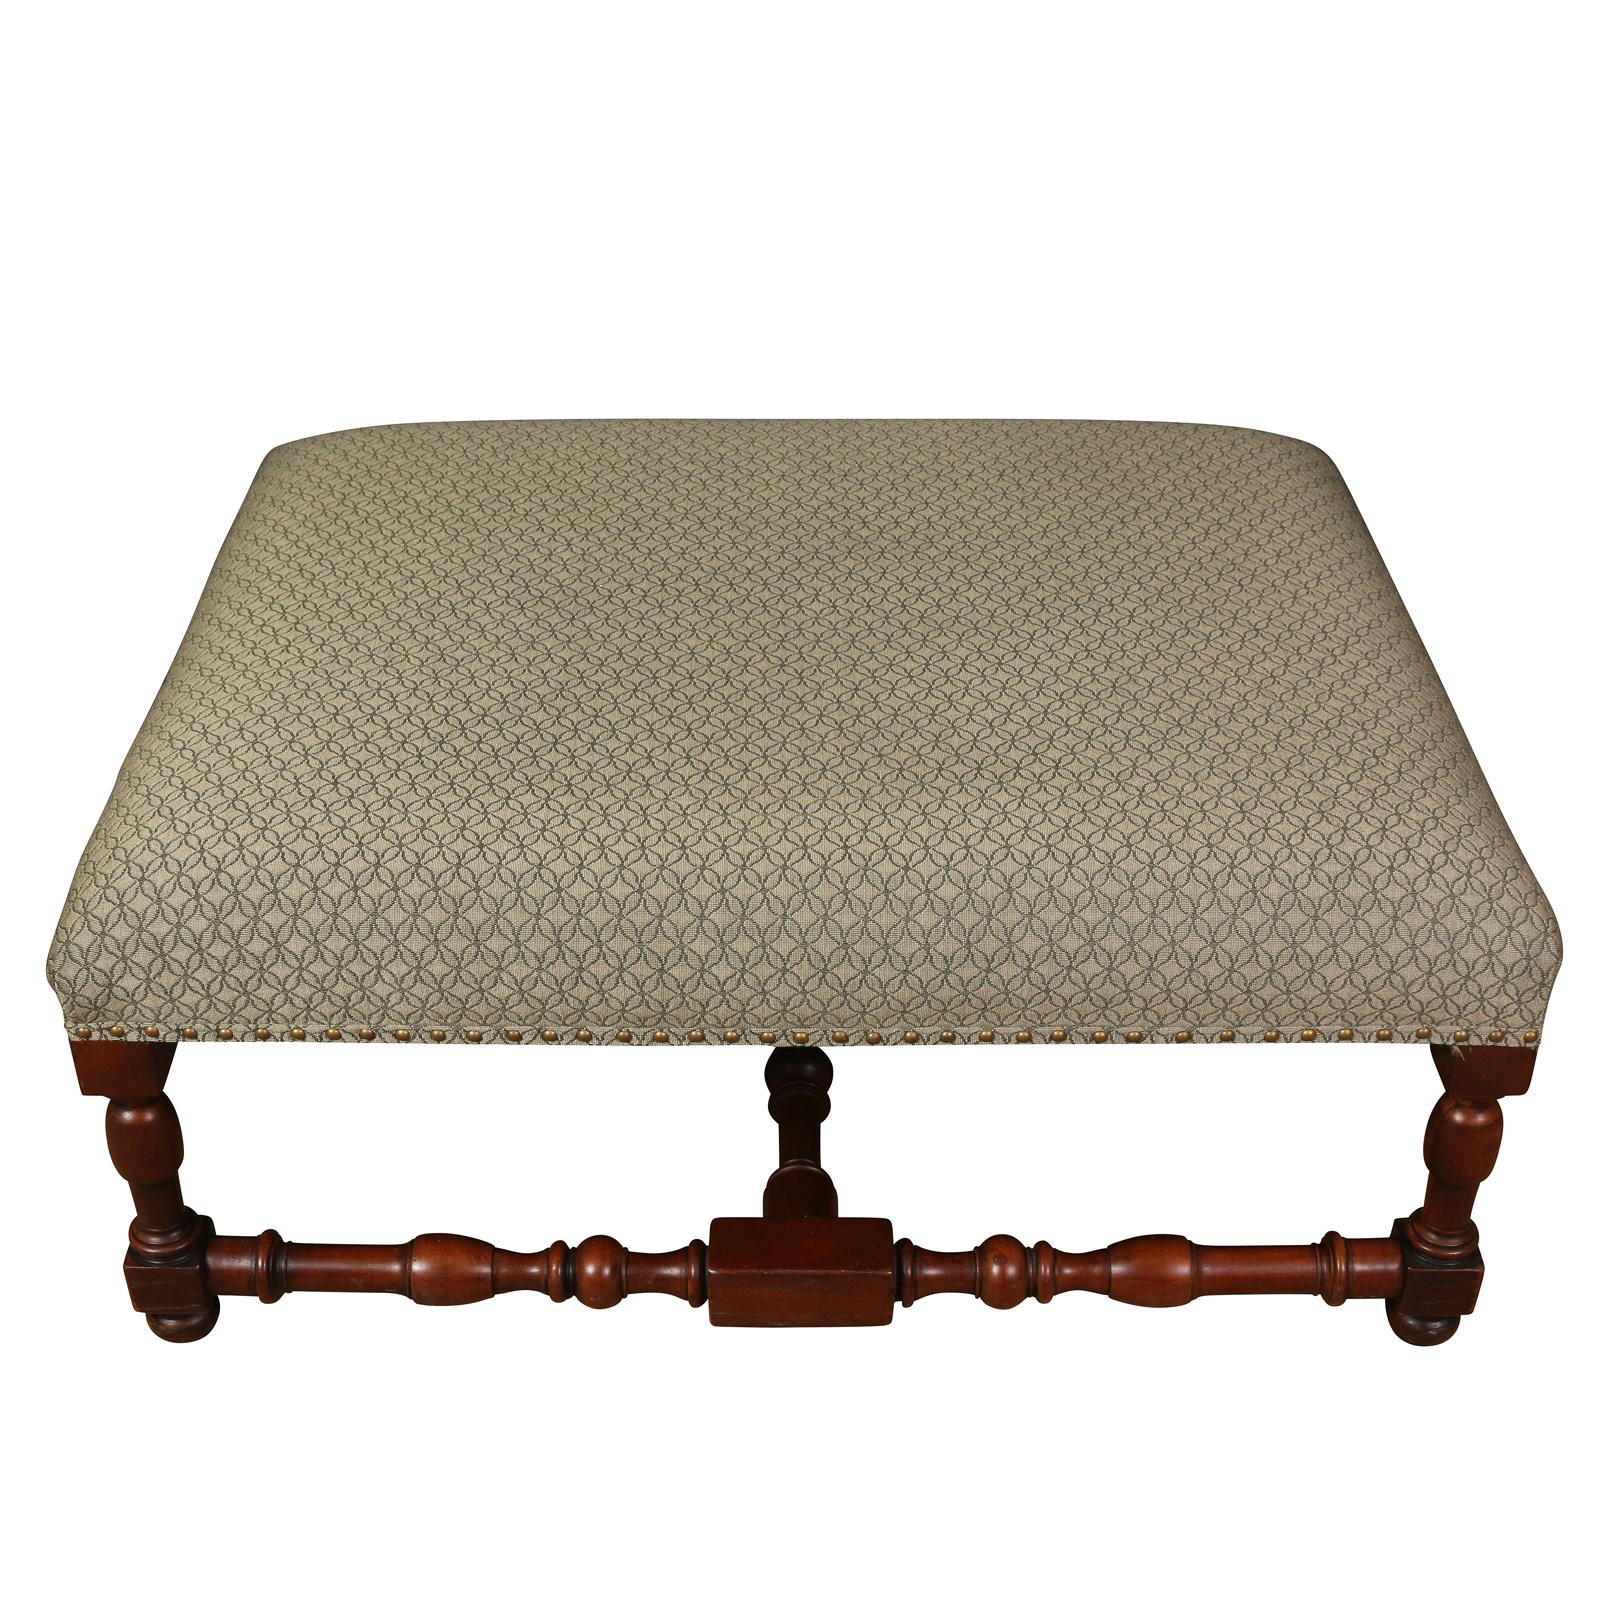 A nice looking square ottoman with an upholstered  top and a turned leg base with a cross stretcher.  Upholstered in a neutral fabric and finished with a tape and nail heads, this handsome piece can also serve as a coffee table for casual